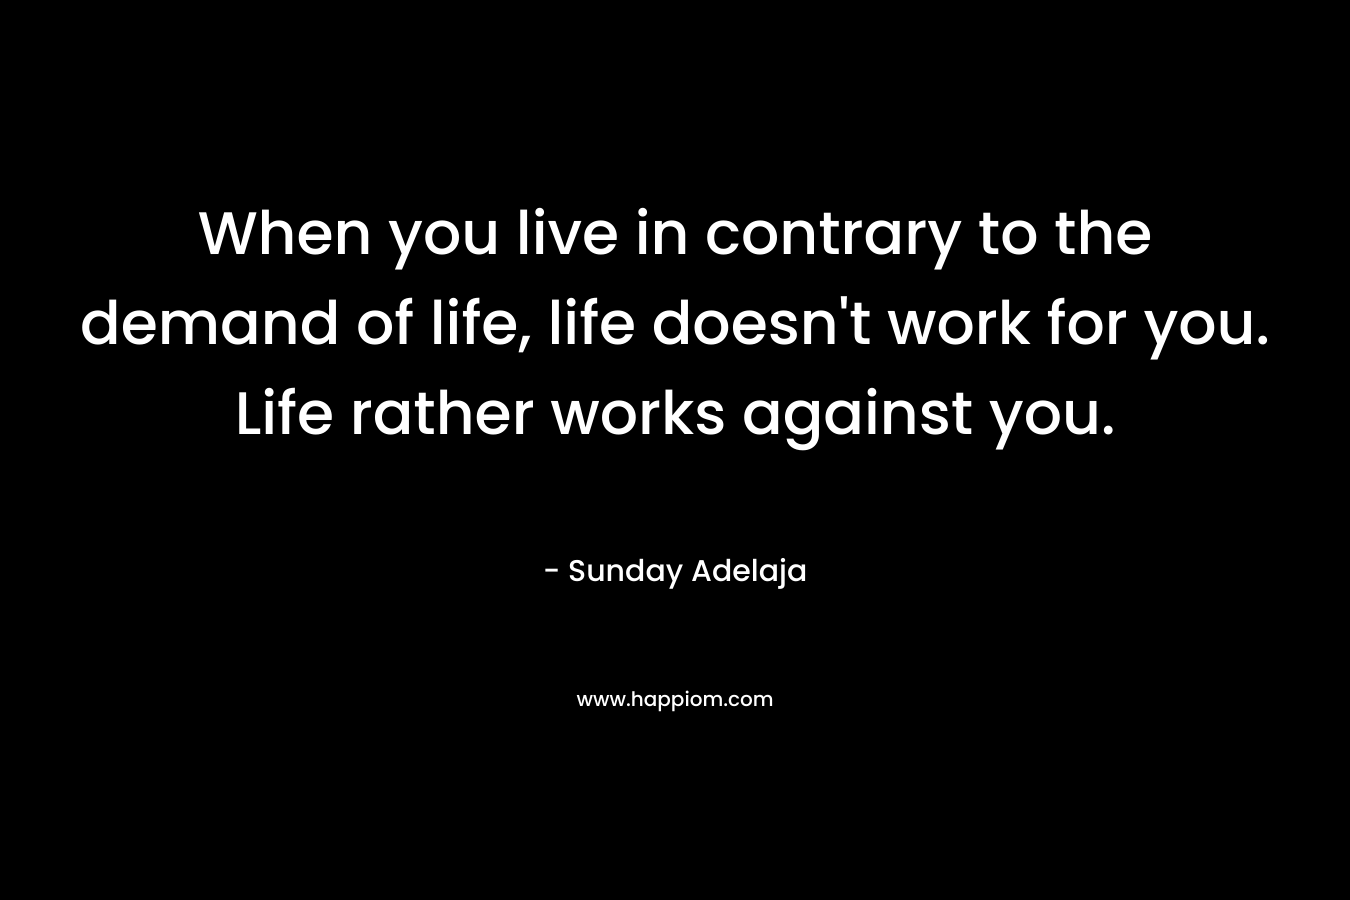 When you live in contrary to the demand of life, life doesn't work for you. Life rather works against you.